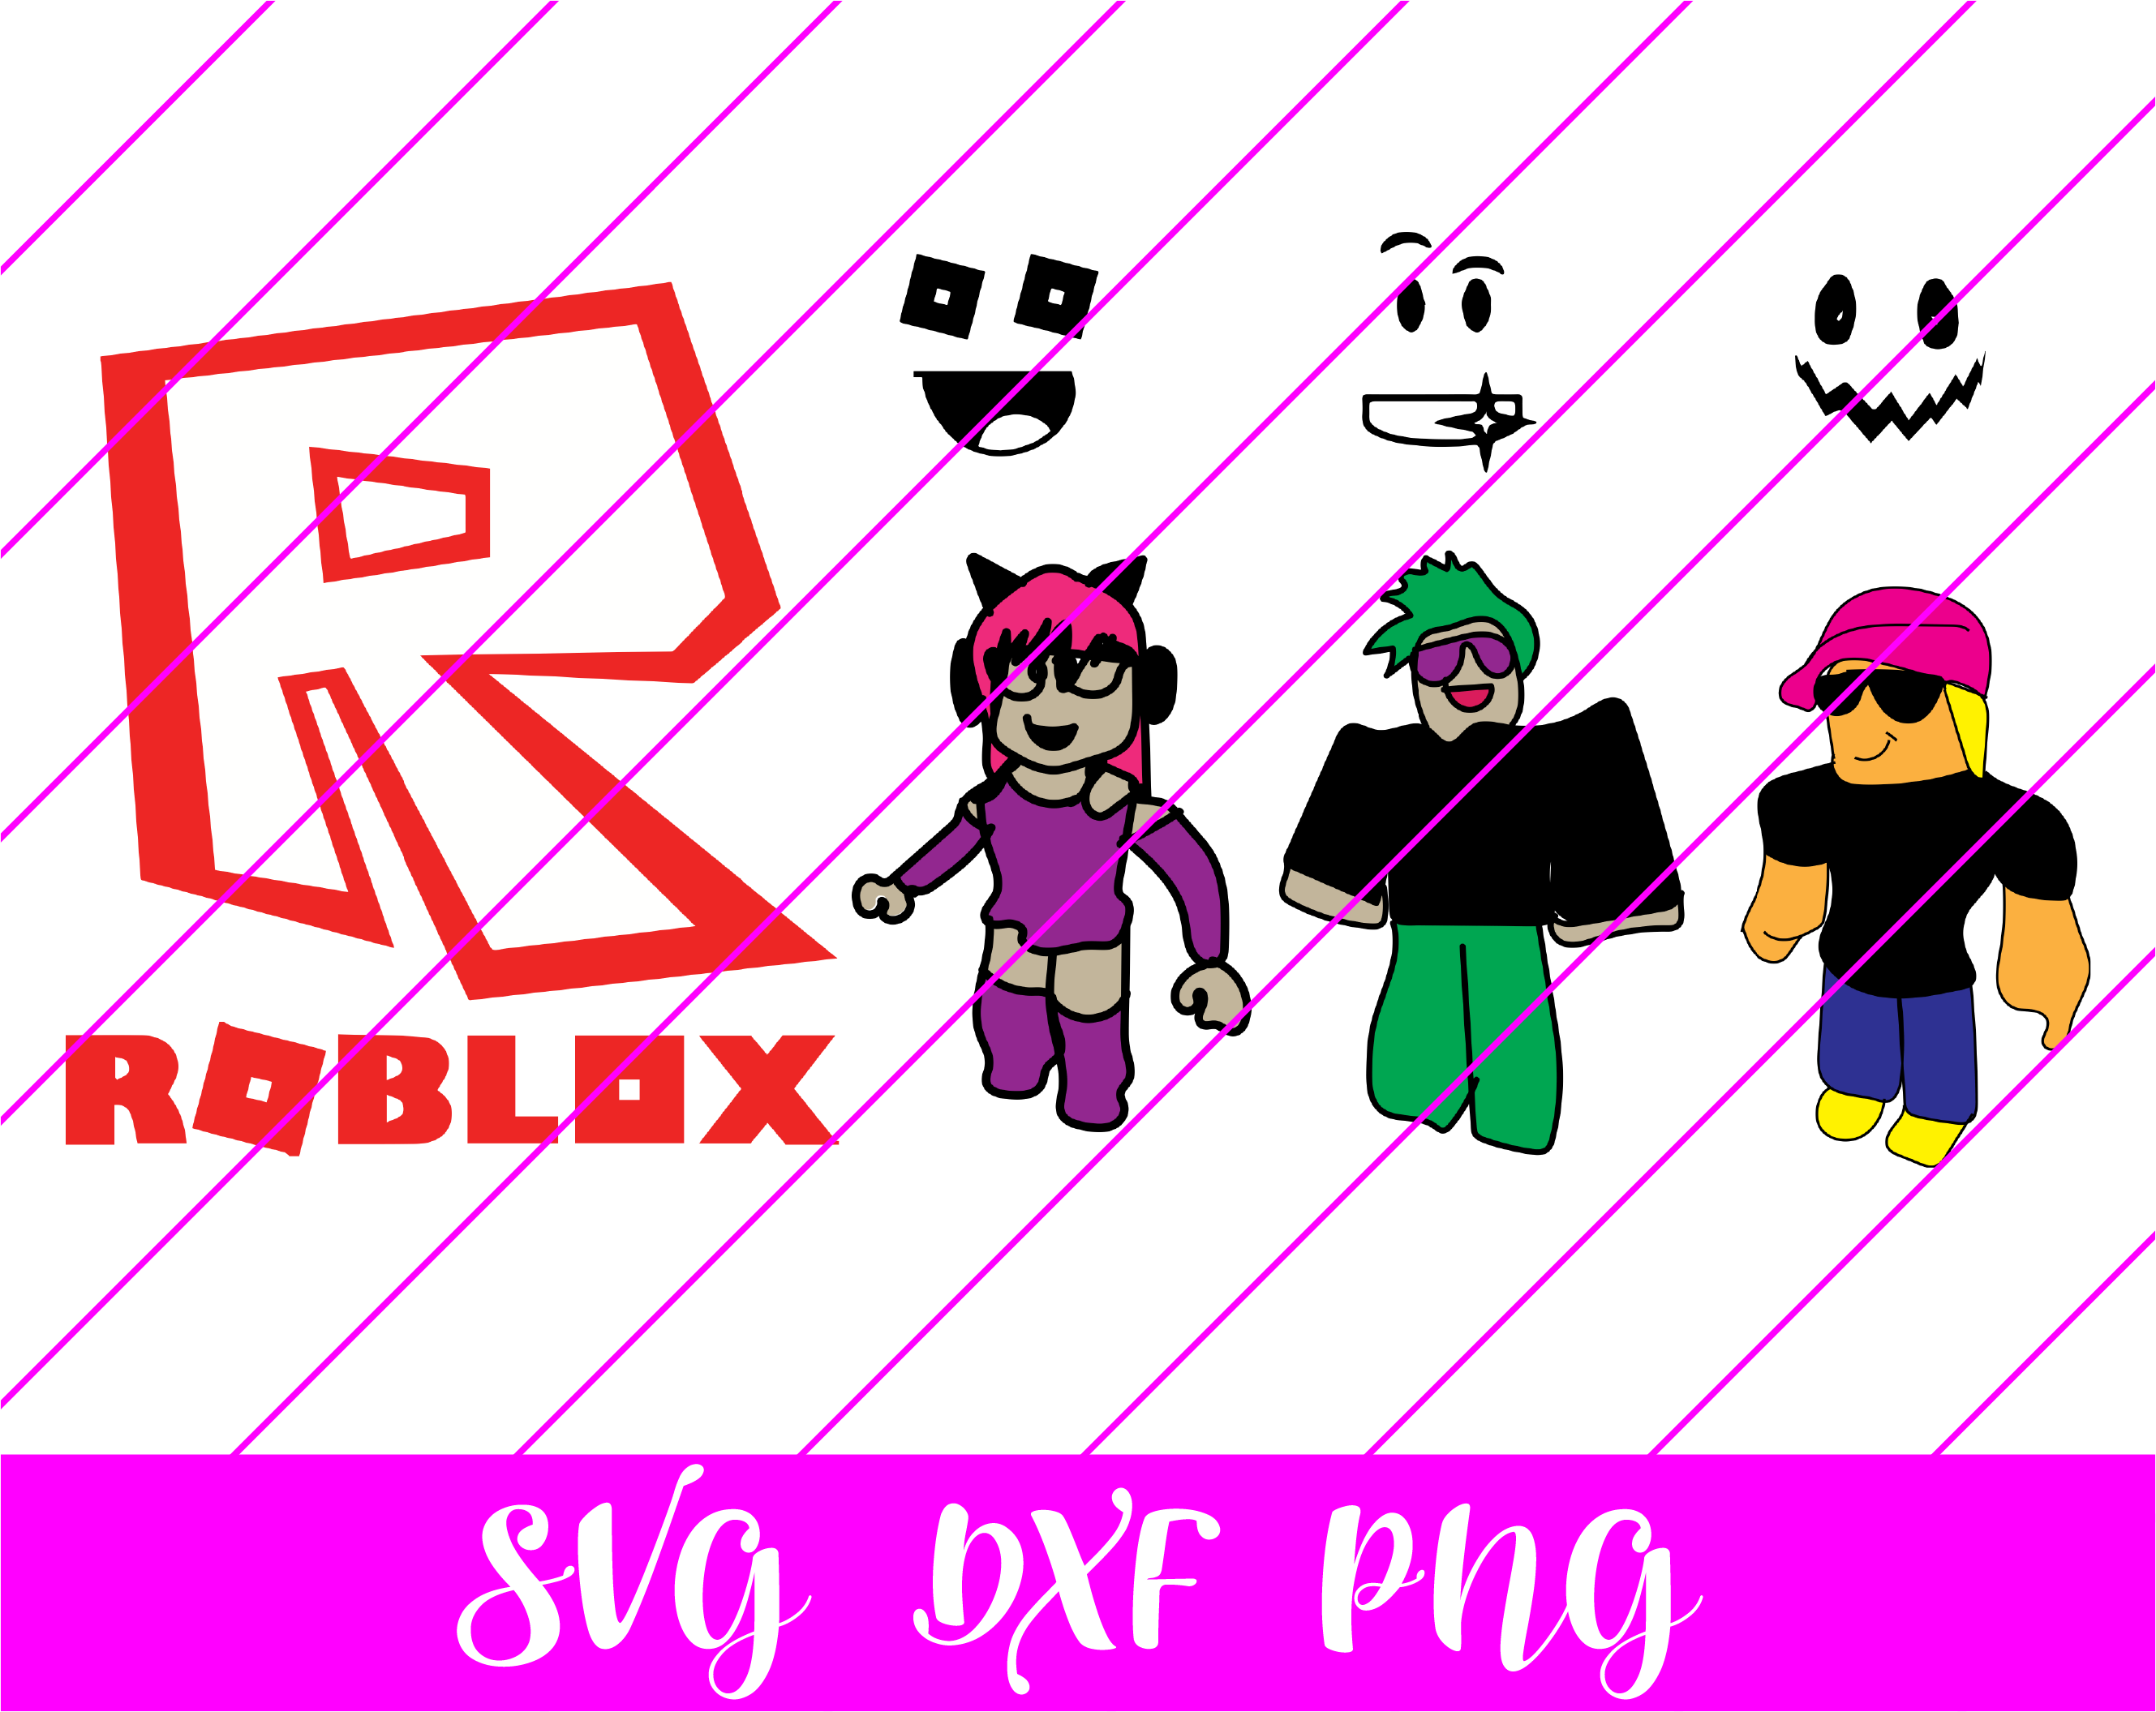 Roblox Svg Free Roblox Svg Download Svg Art - roblox free pictures